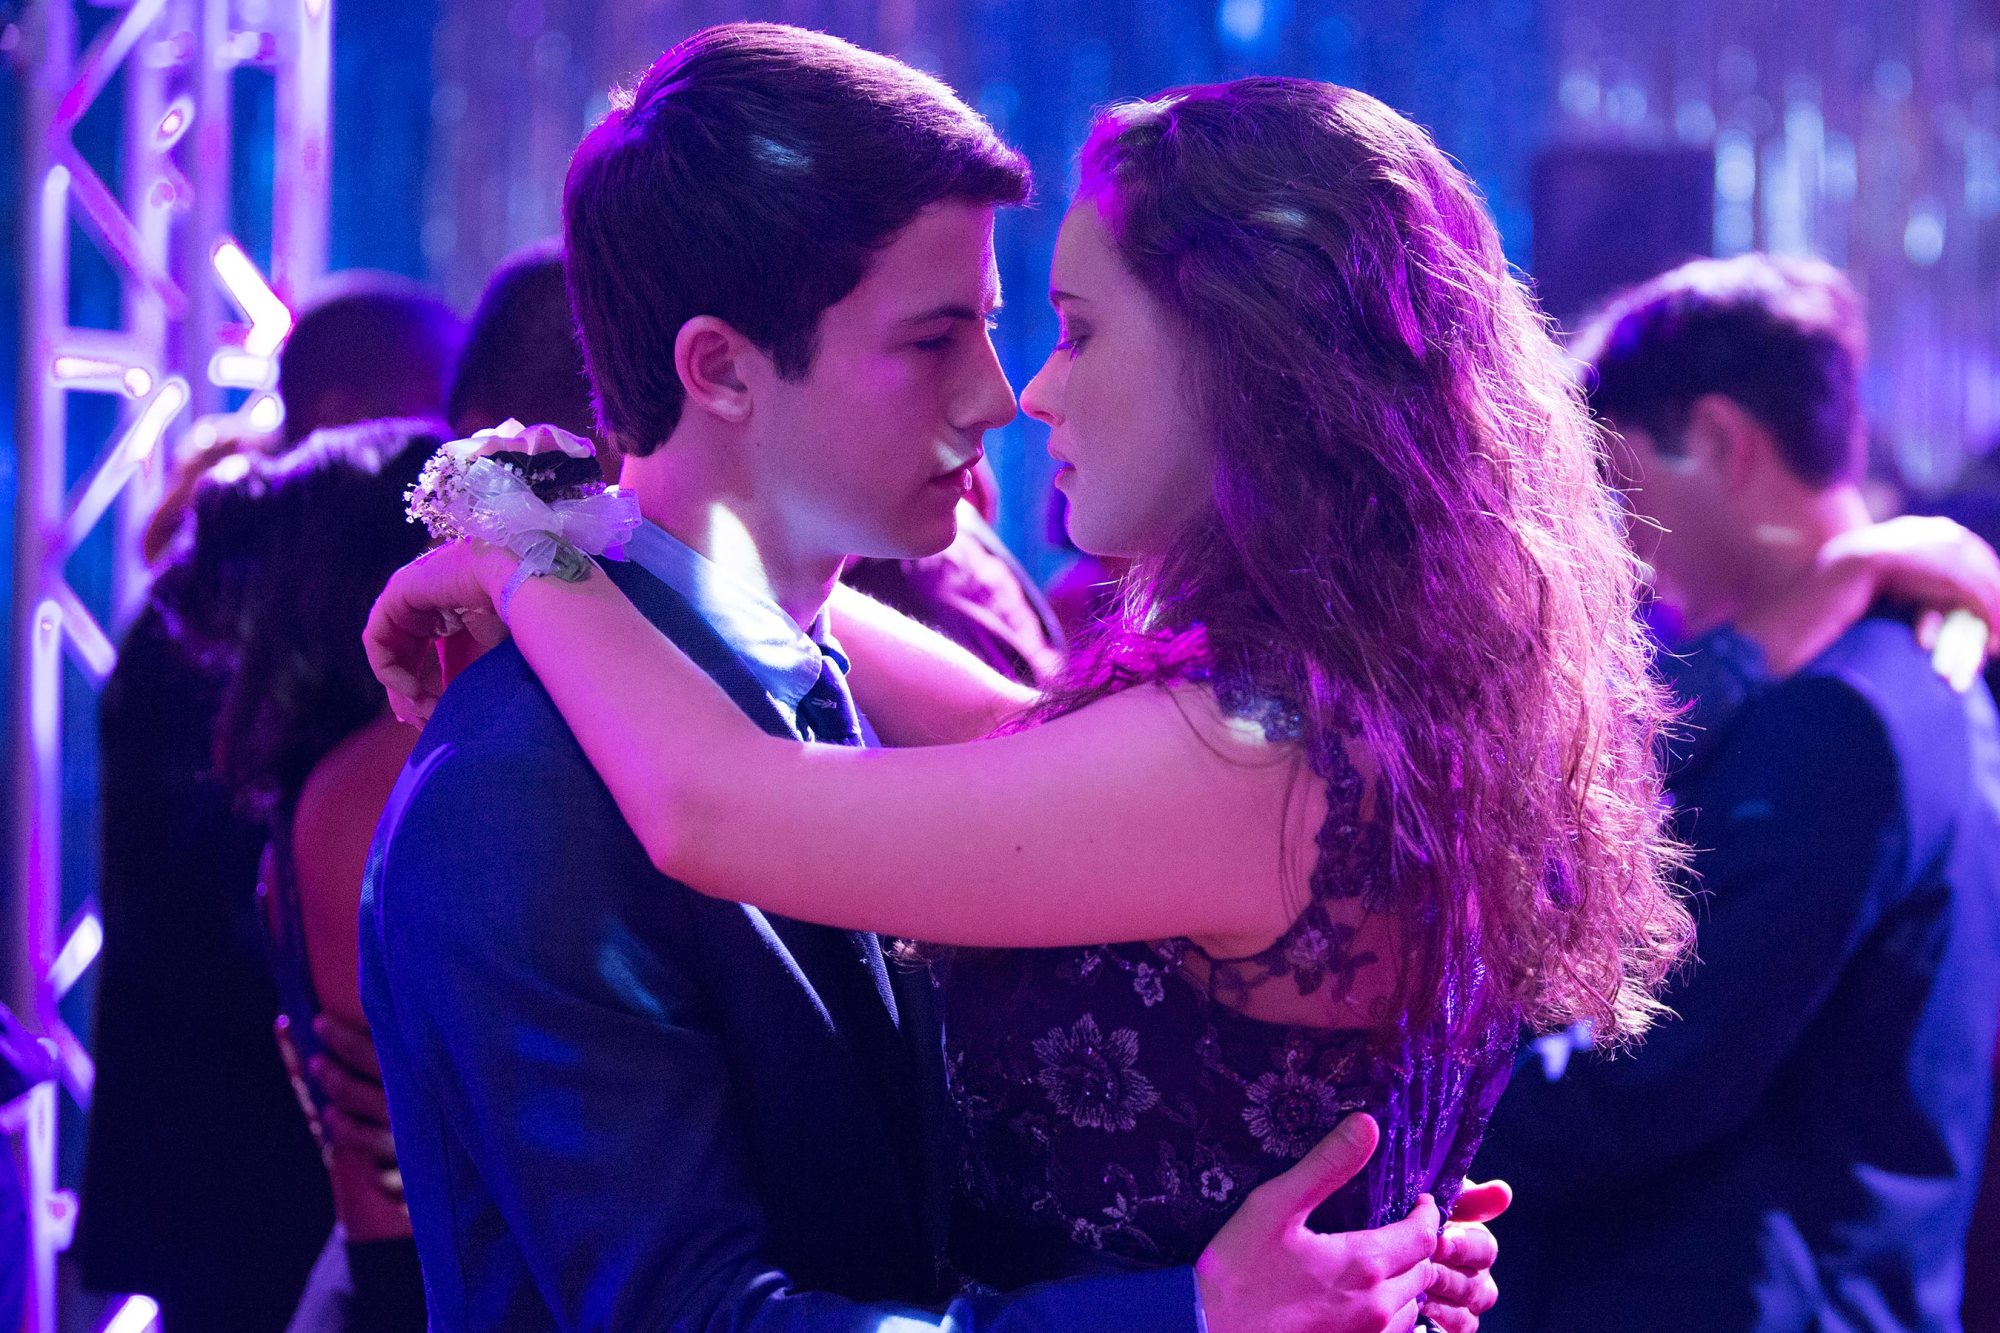 13 REASONS WHY - PRODUCTION STILLS - 023 DESCRIPTION 13 REASONS WHY SEASON Season 1 EPISODE 5 PHOTO CREDIT Beth Dubber/Netflix PICTURED (Left to Right) Dylan Minnette and Katherine Langford